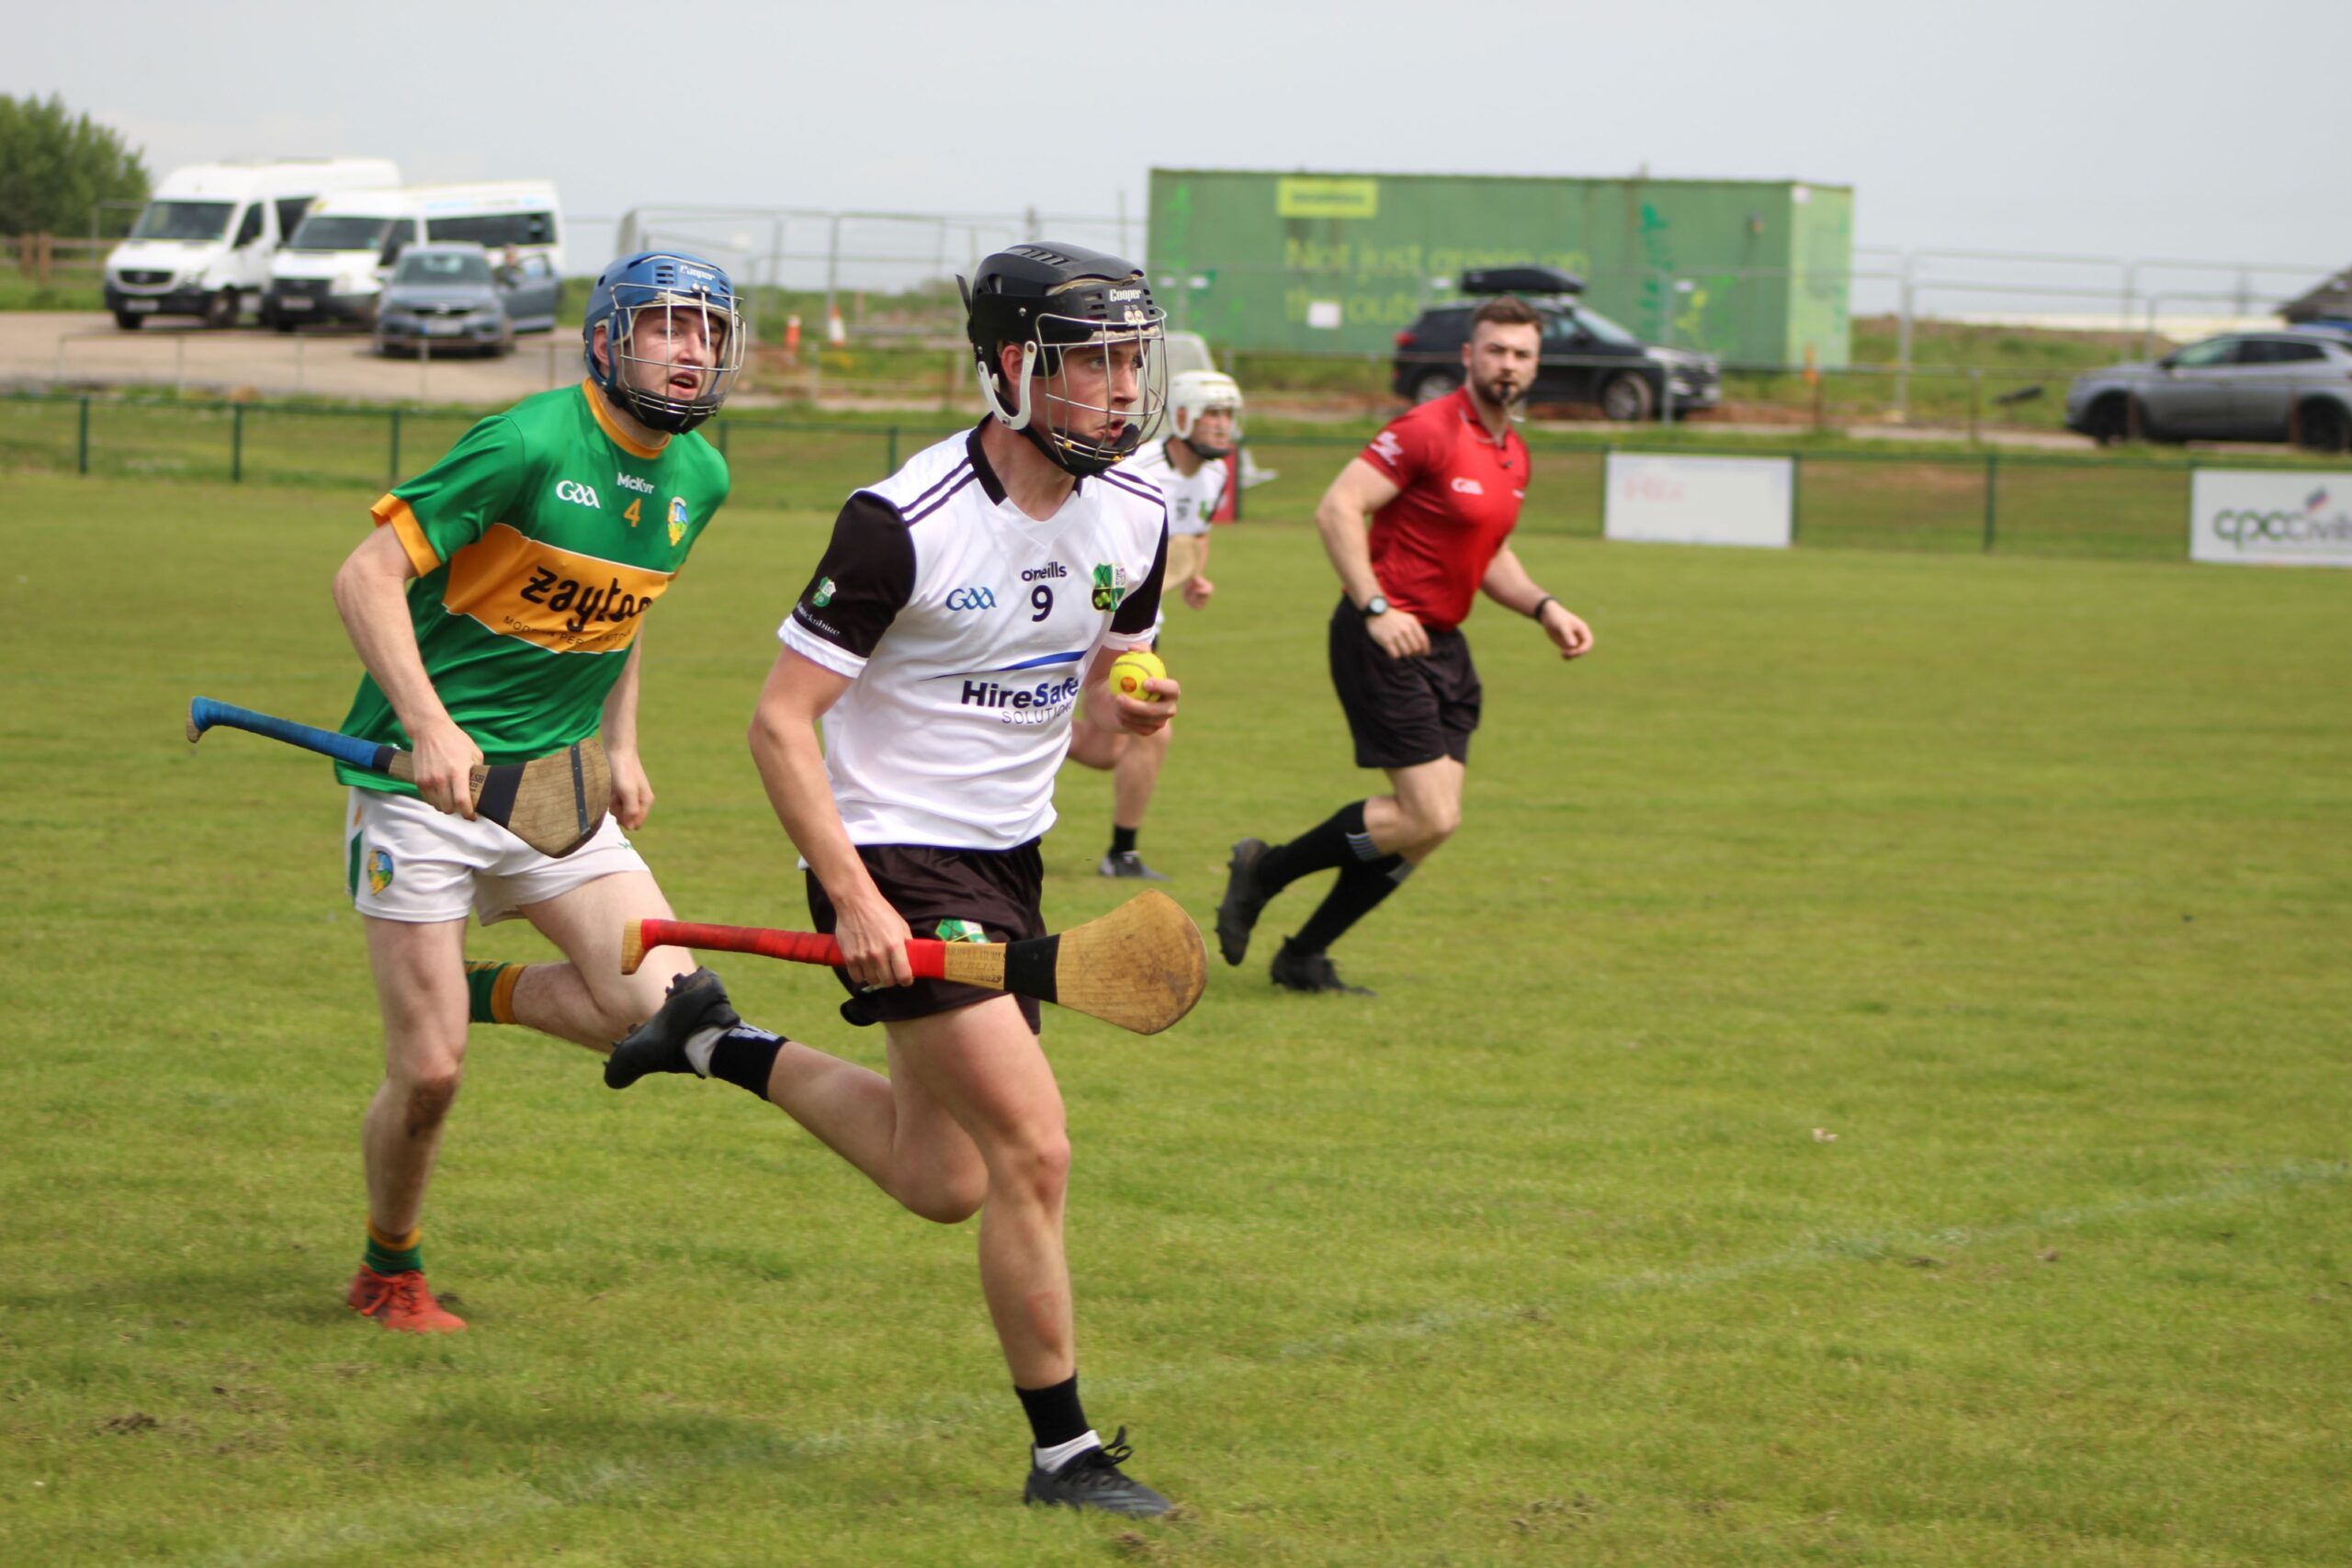 Lory Meagher Cup, Round 4: Warwickshire vs Leitrim – Match Recap